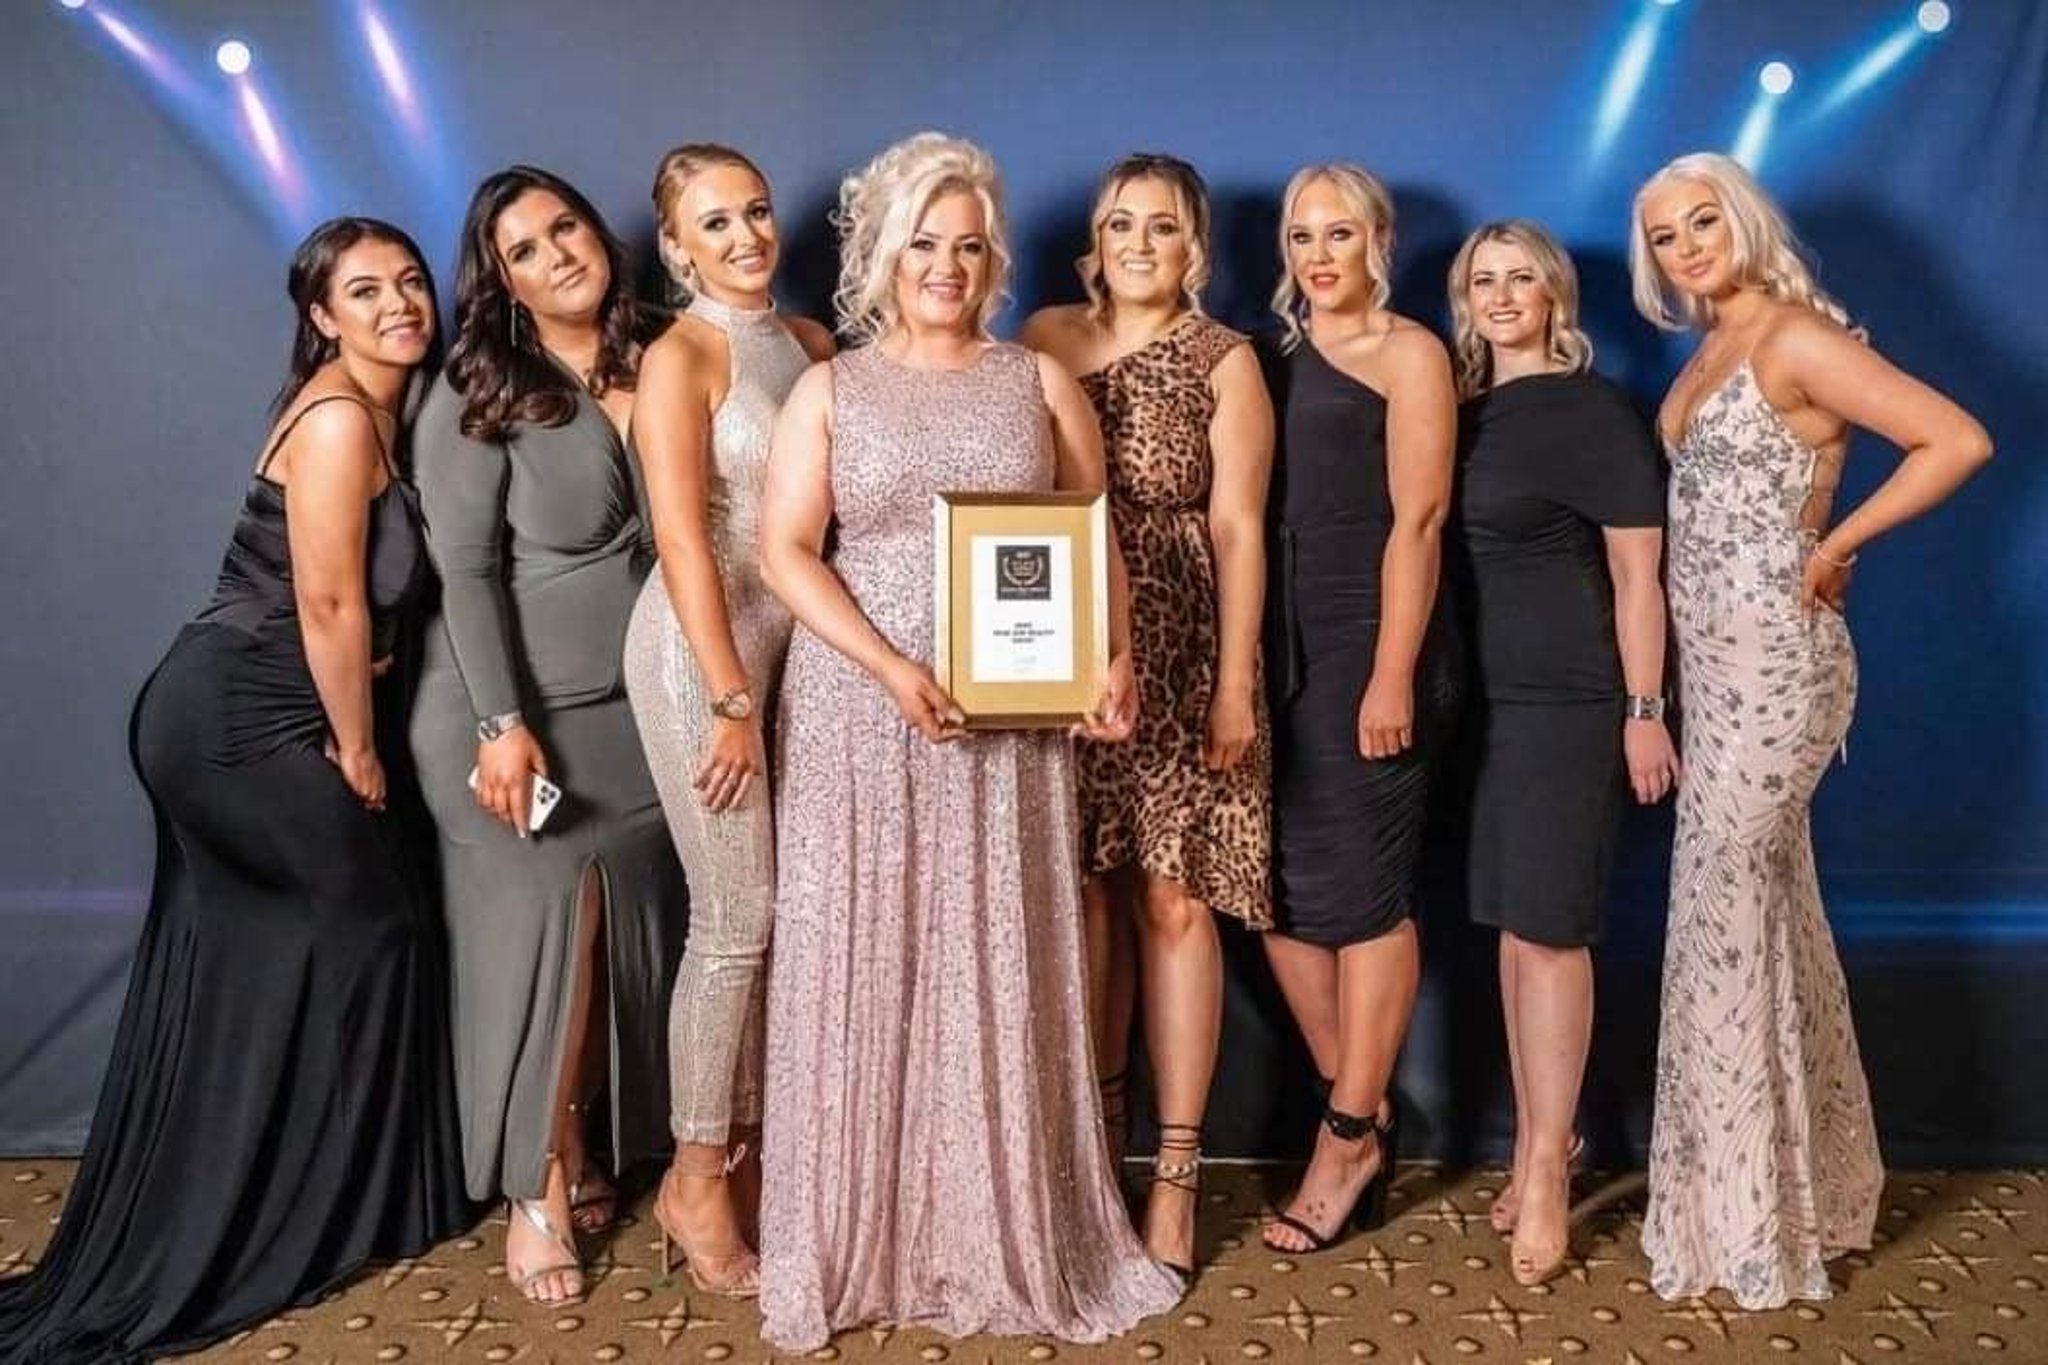 Halifax business owner thrilled after her shop is crowned best hair and beauty salon in England